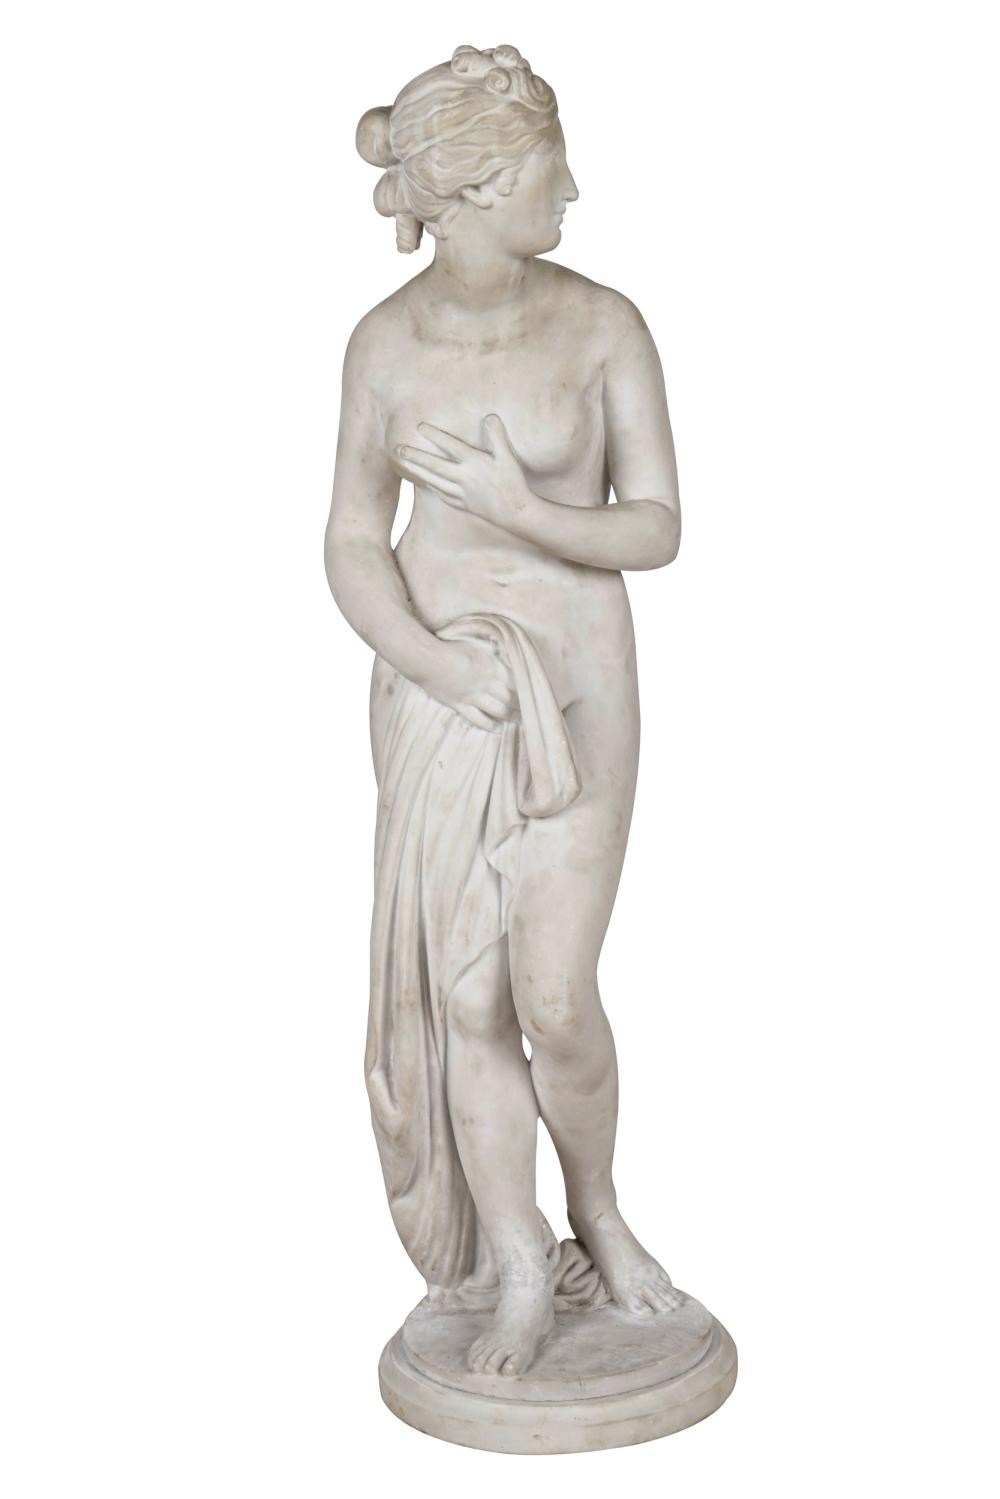 ITALIAN MARBLE FIGURE OF A GIRLProvenance  33237c